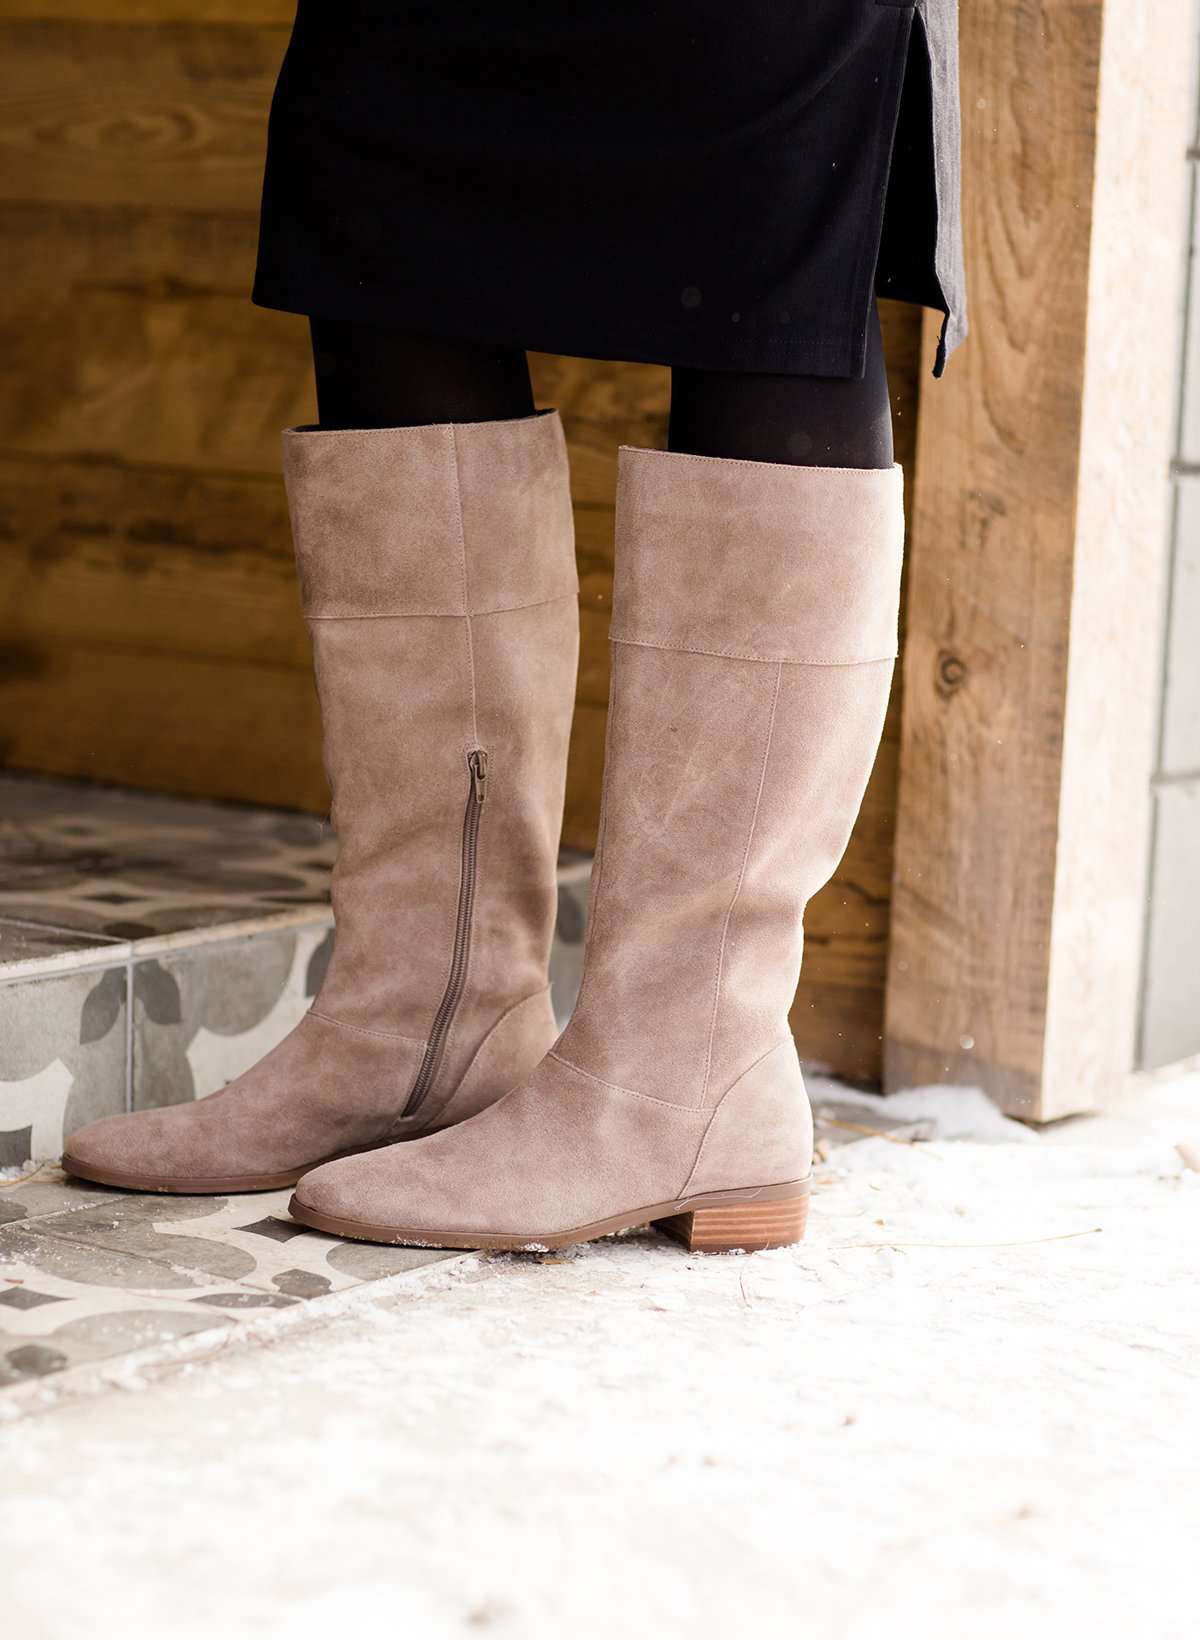 These are cow split suede tall riding boots. The have a stacked heel and feature a size zip on the 16" shaft of the riding boot. These boots are being word with a modest midi dress!